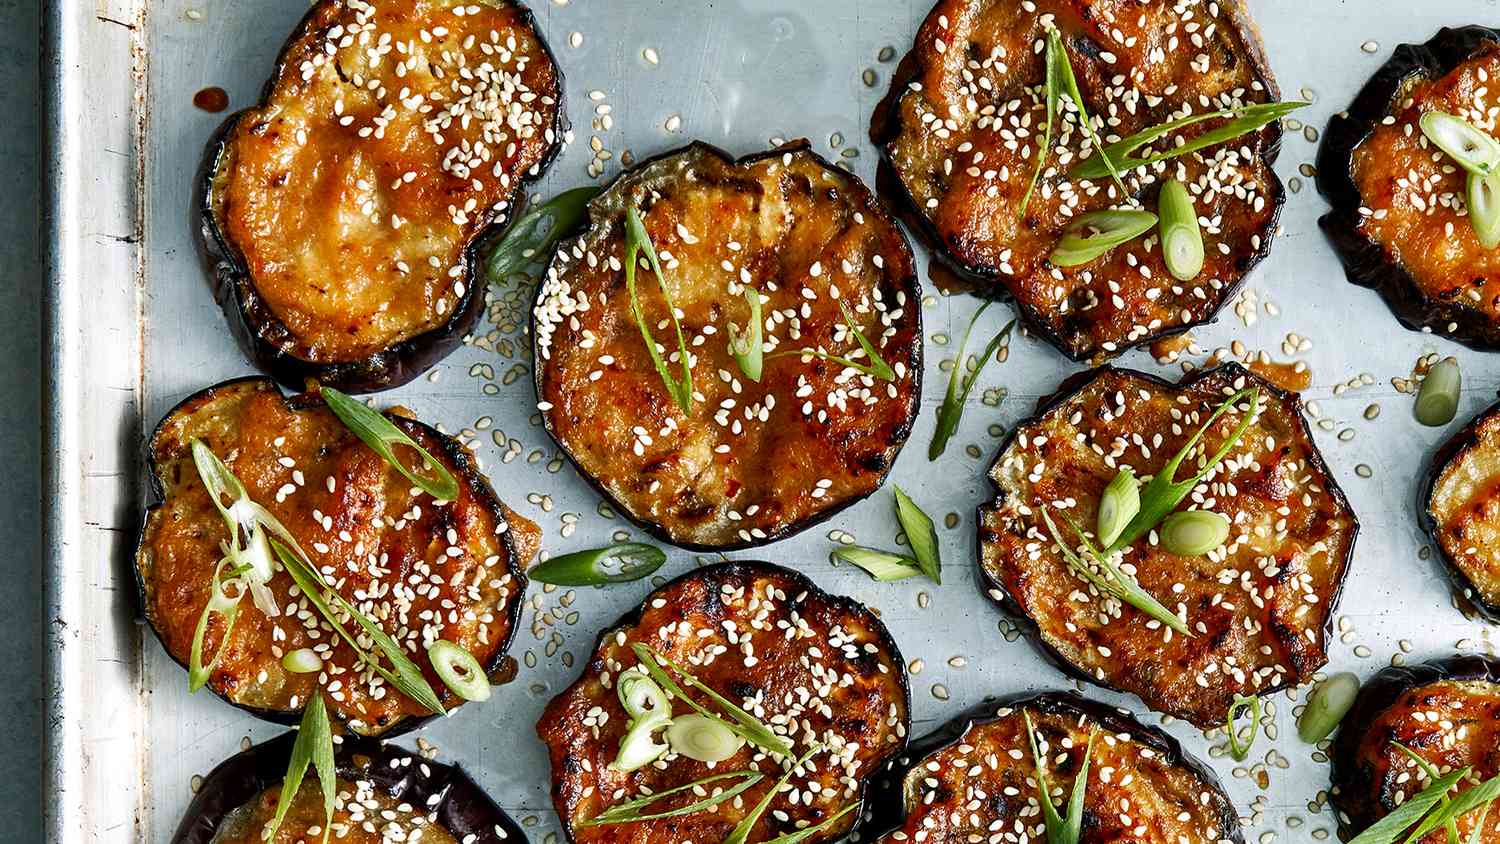 Real Simple.com, "April Staple" Sesame Seeds -Roasted Eggplant with Miso and Sesame Seeds